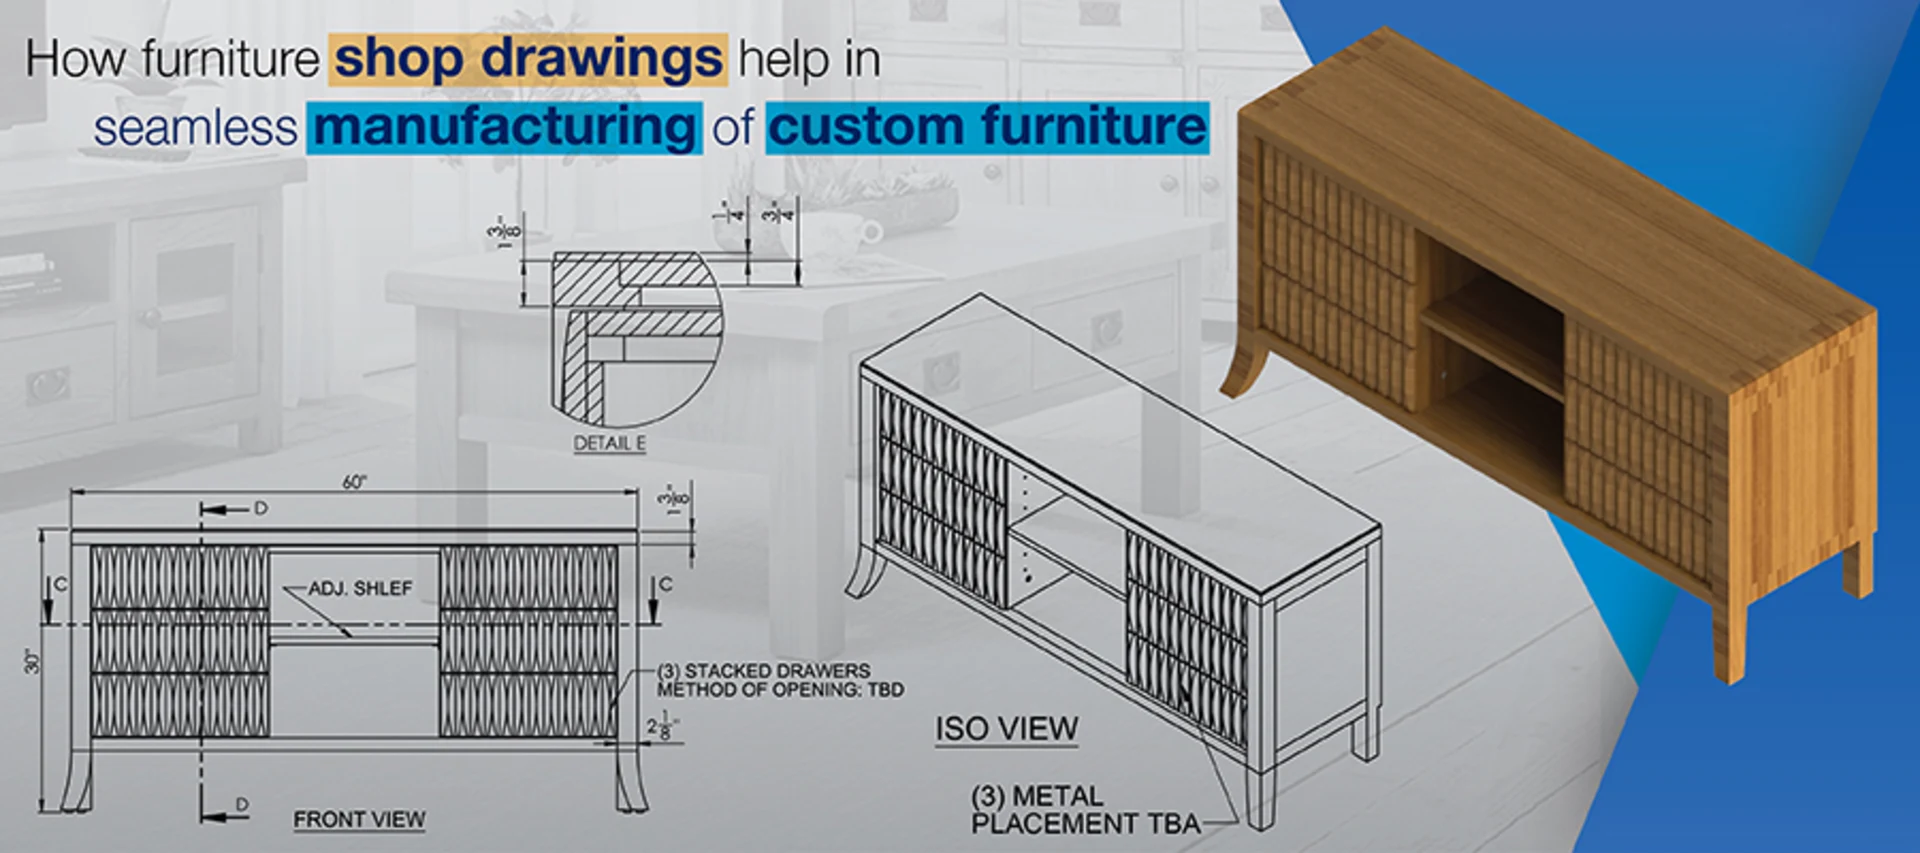 How furniture shop drawings help in

seamless [aNUFACIUFNG of CUSIOMIUFNItUre

 

ISO VIEW

  
 

3) METAL
CEMENT TBA